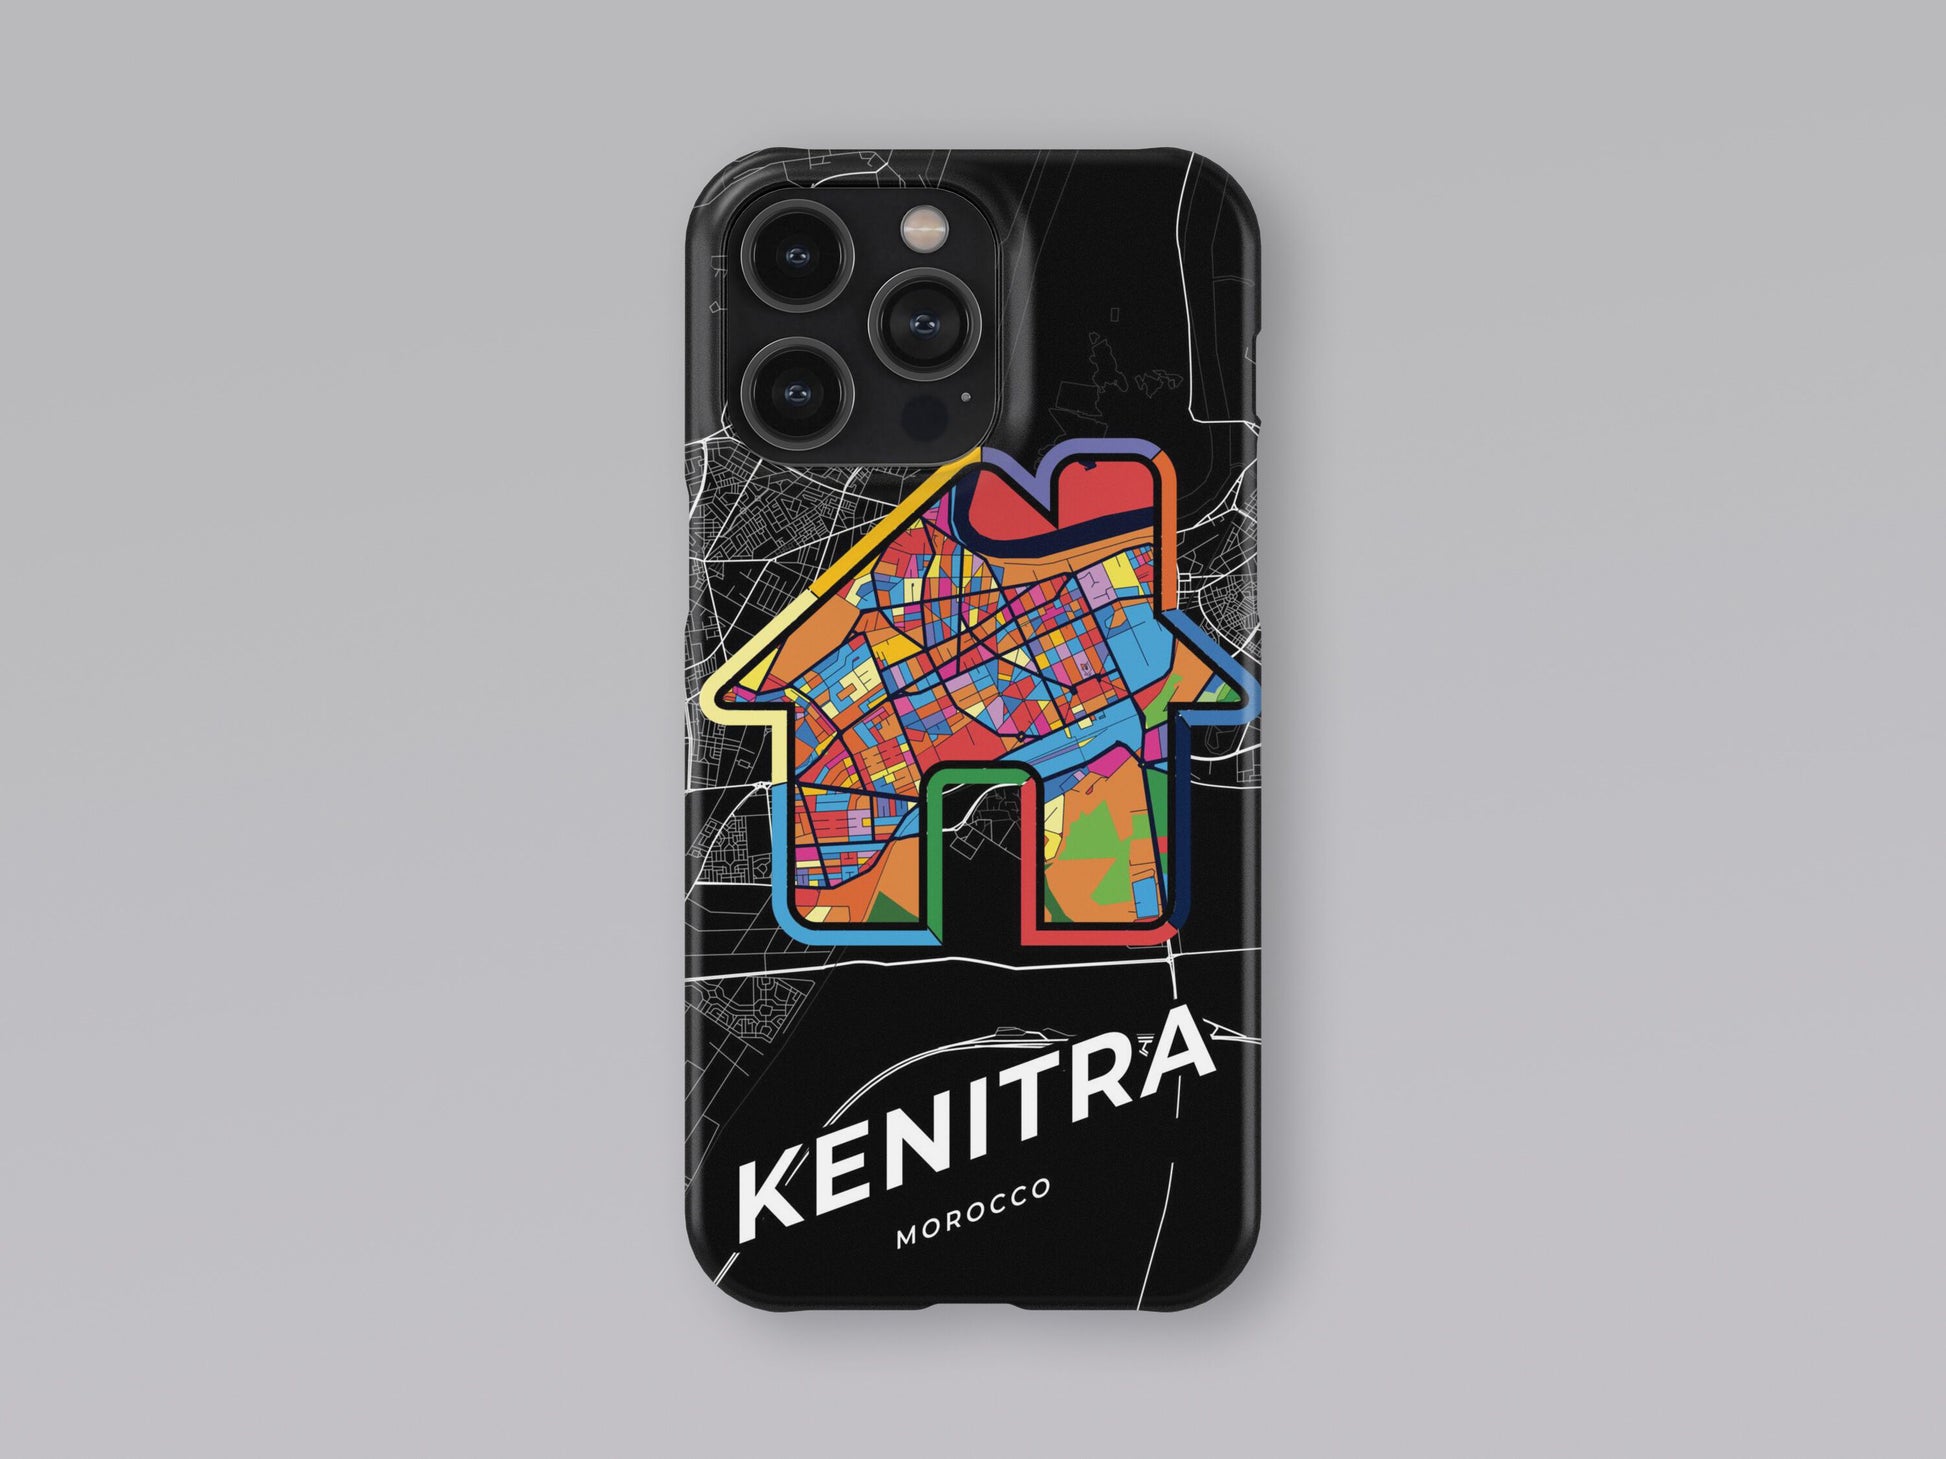 Kenitra Morocco slim phone case with colorful icon. Birthday, wedding or housewarming gift. Couple match cases. 3